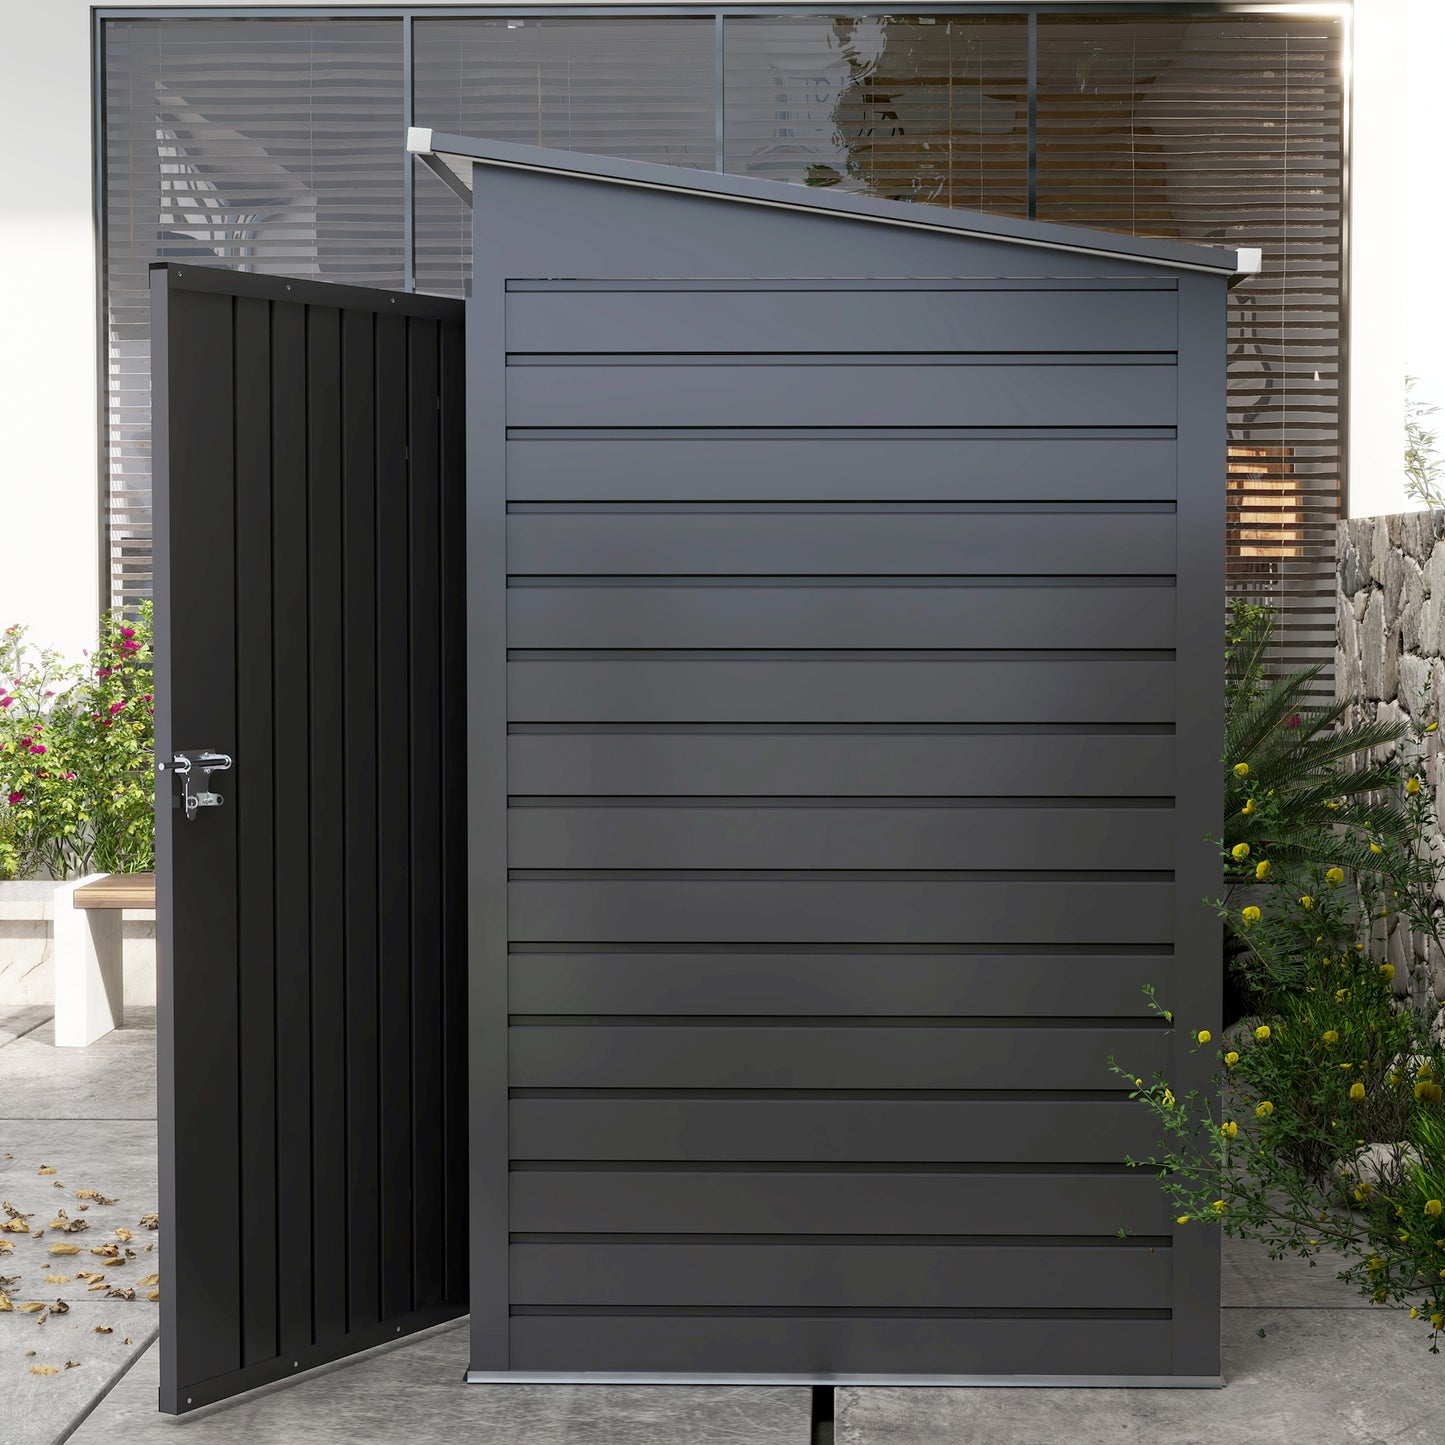 Outsunny 8 x 4FT Galvanised Garden Storage Shed, Metal Outdoor Shed with Double Doors and 2 Vents, Grey